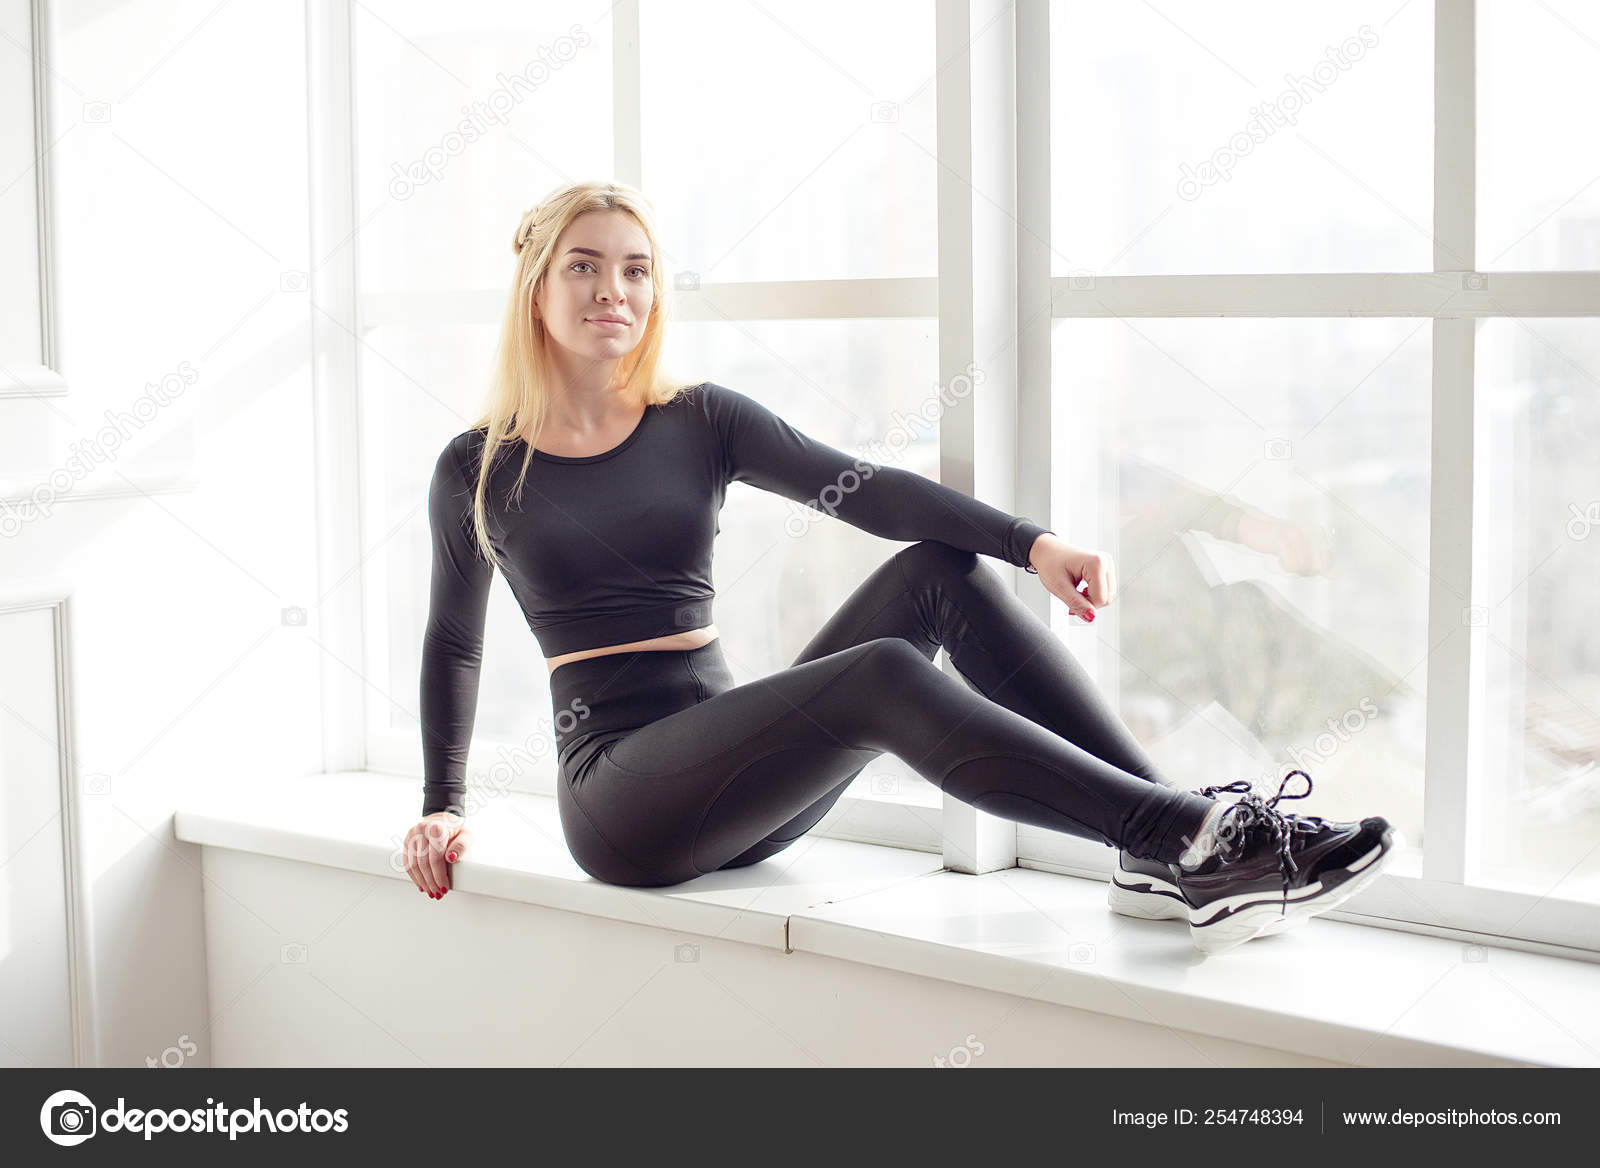 Young slim woman with an athletic body blonde hair wearing in